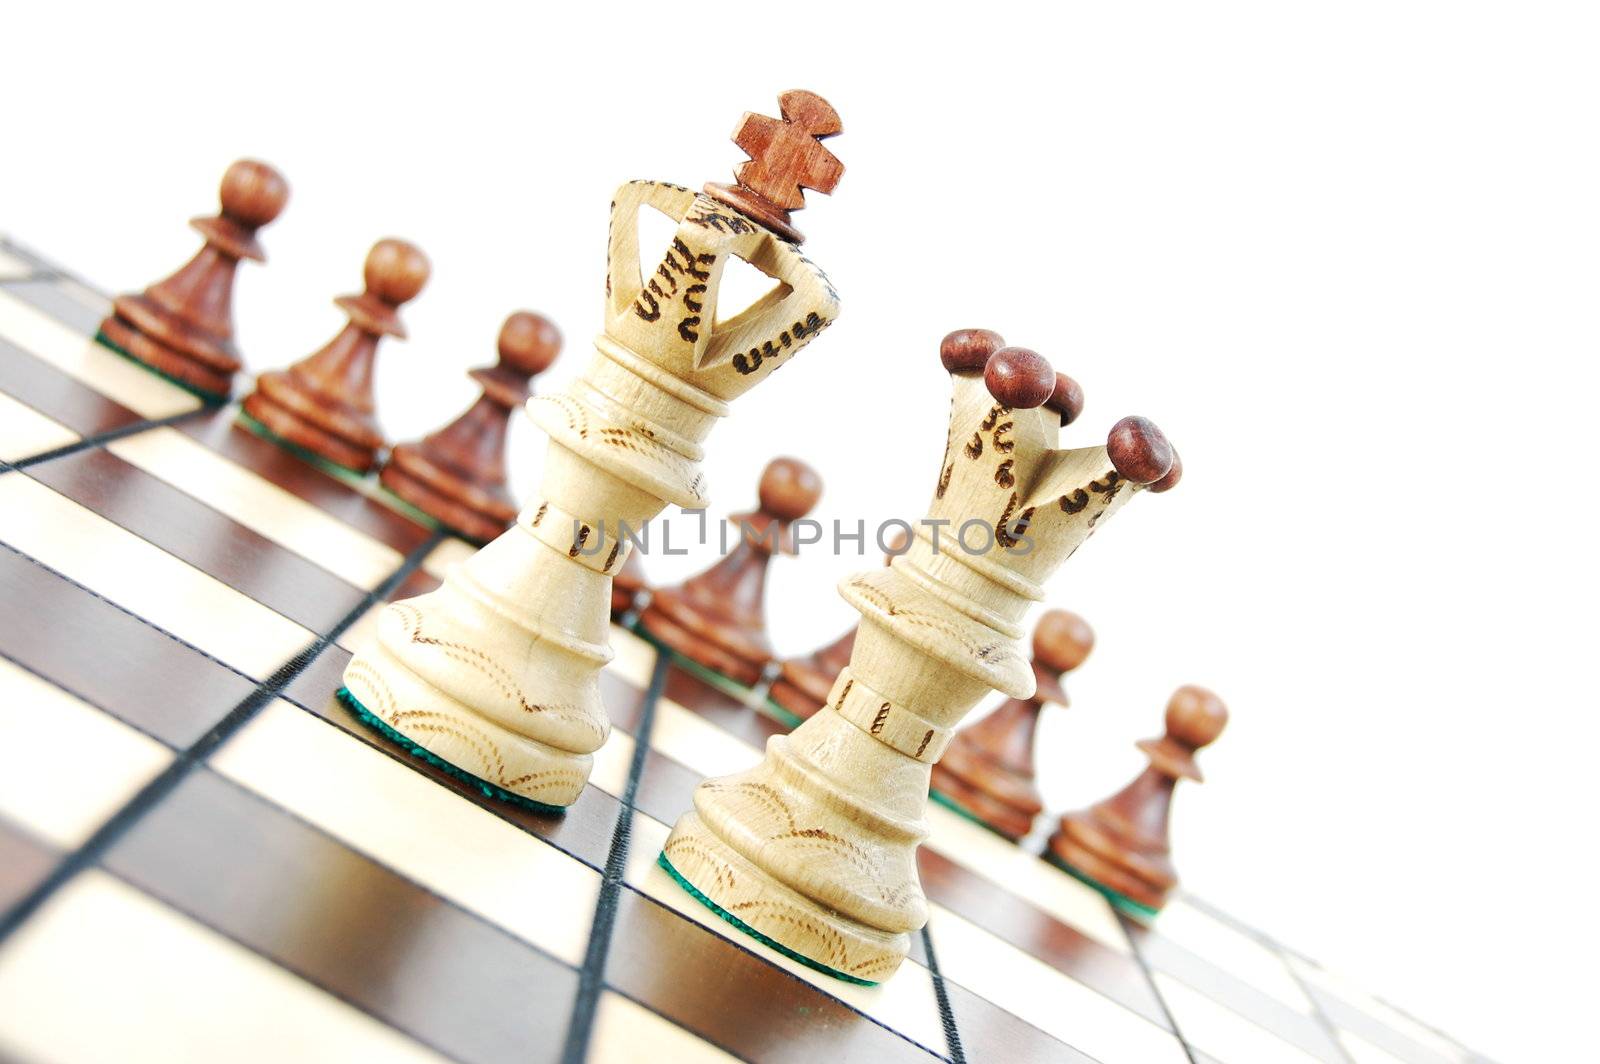 chess pieces on chess board showing concept for success and power